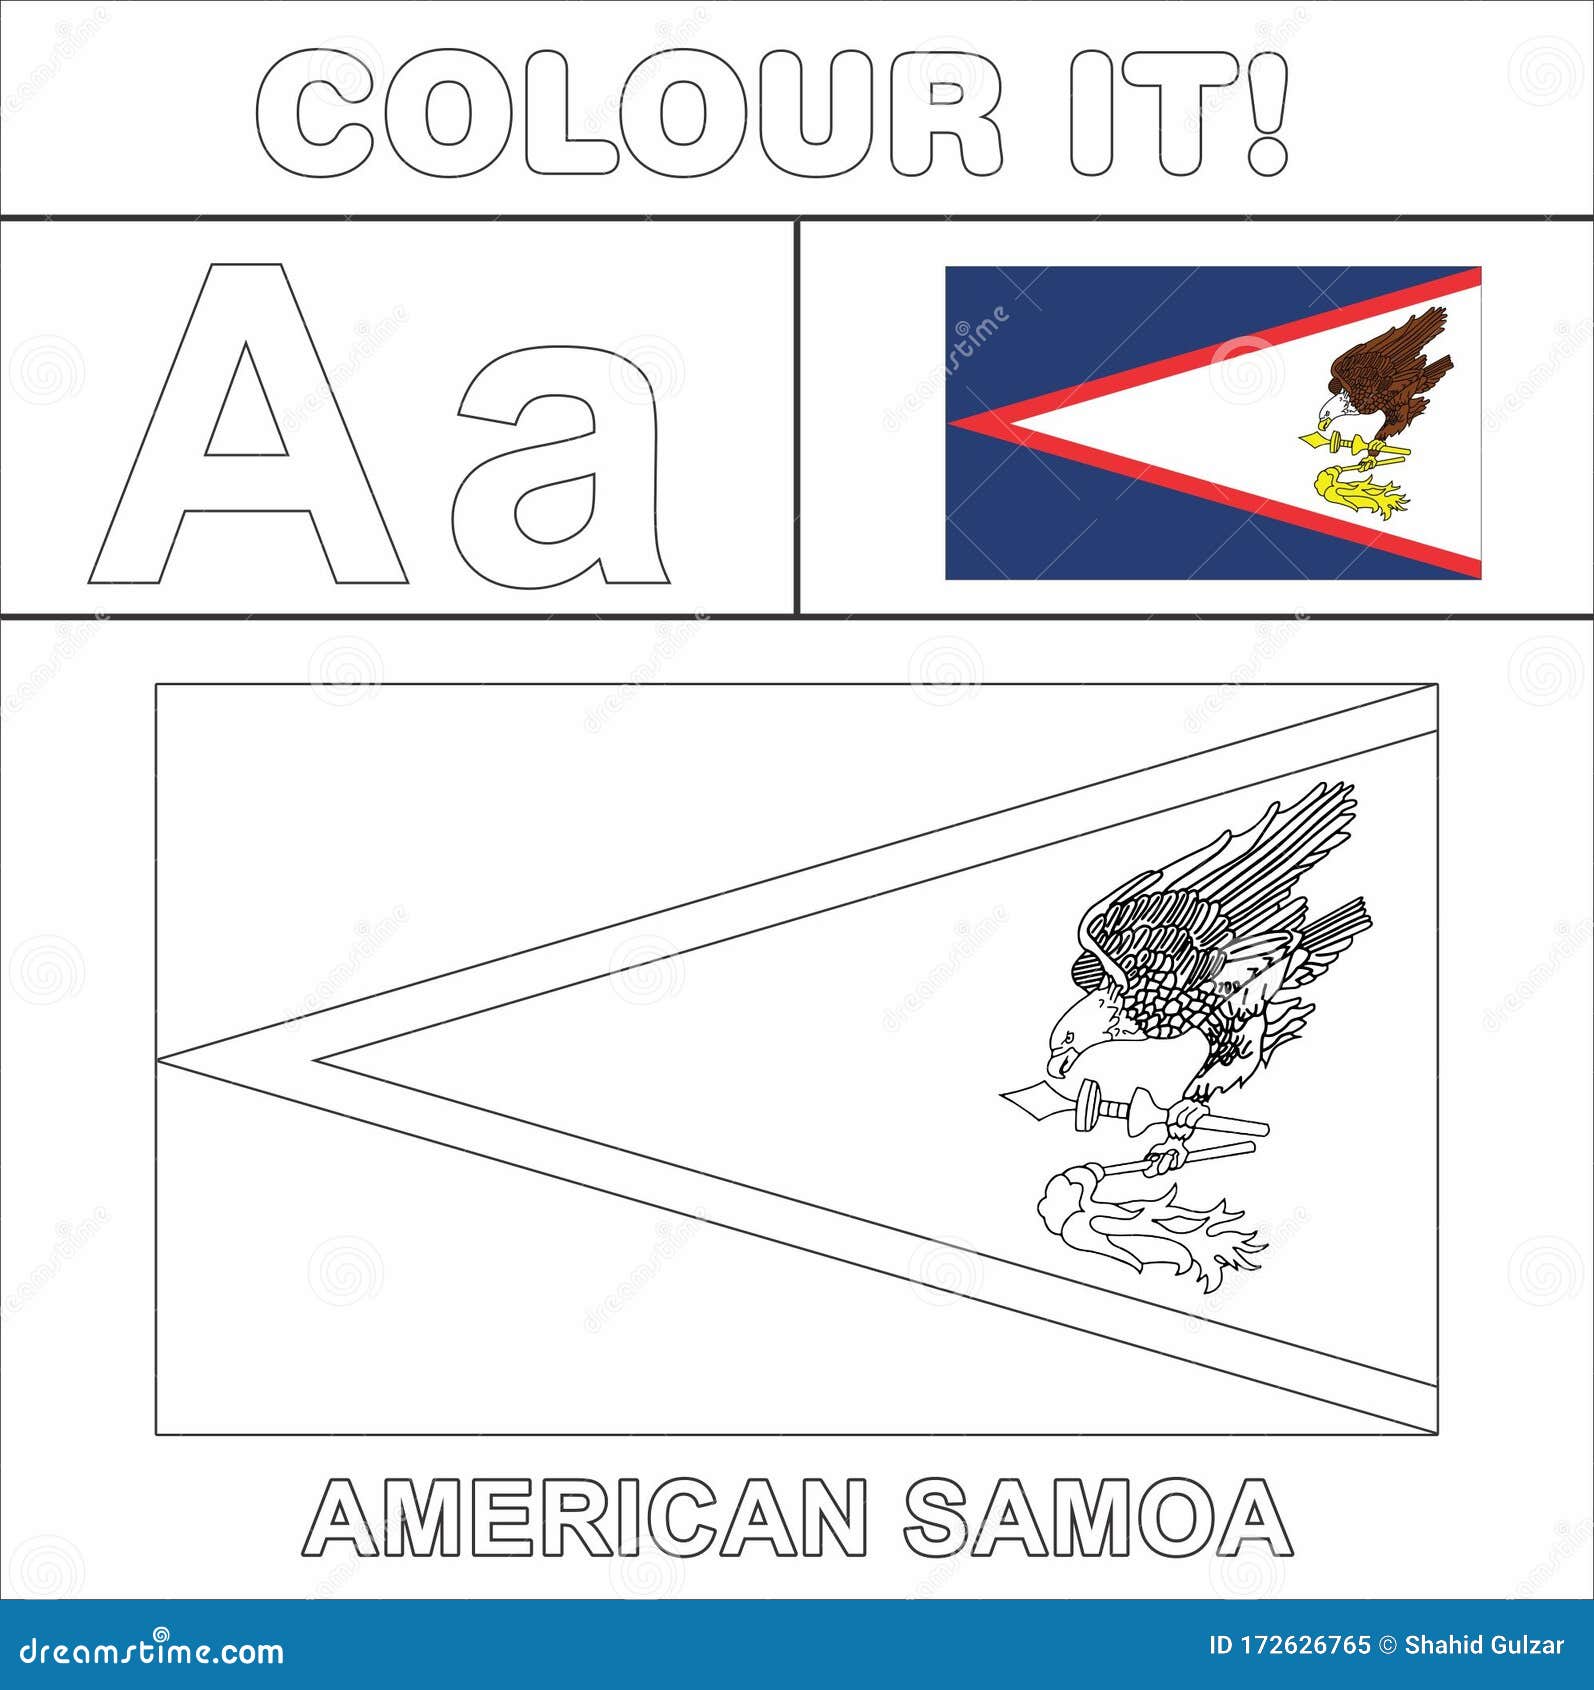 colour it kids colouring page country starting from english letter a a american samoa how to colorflag